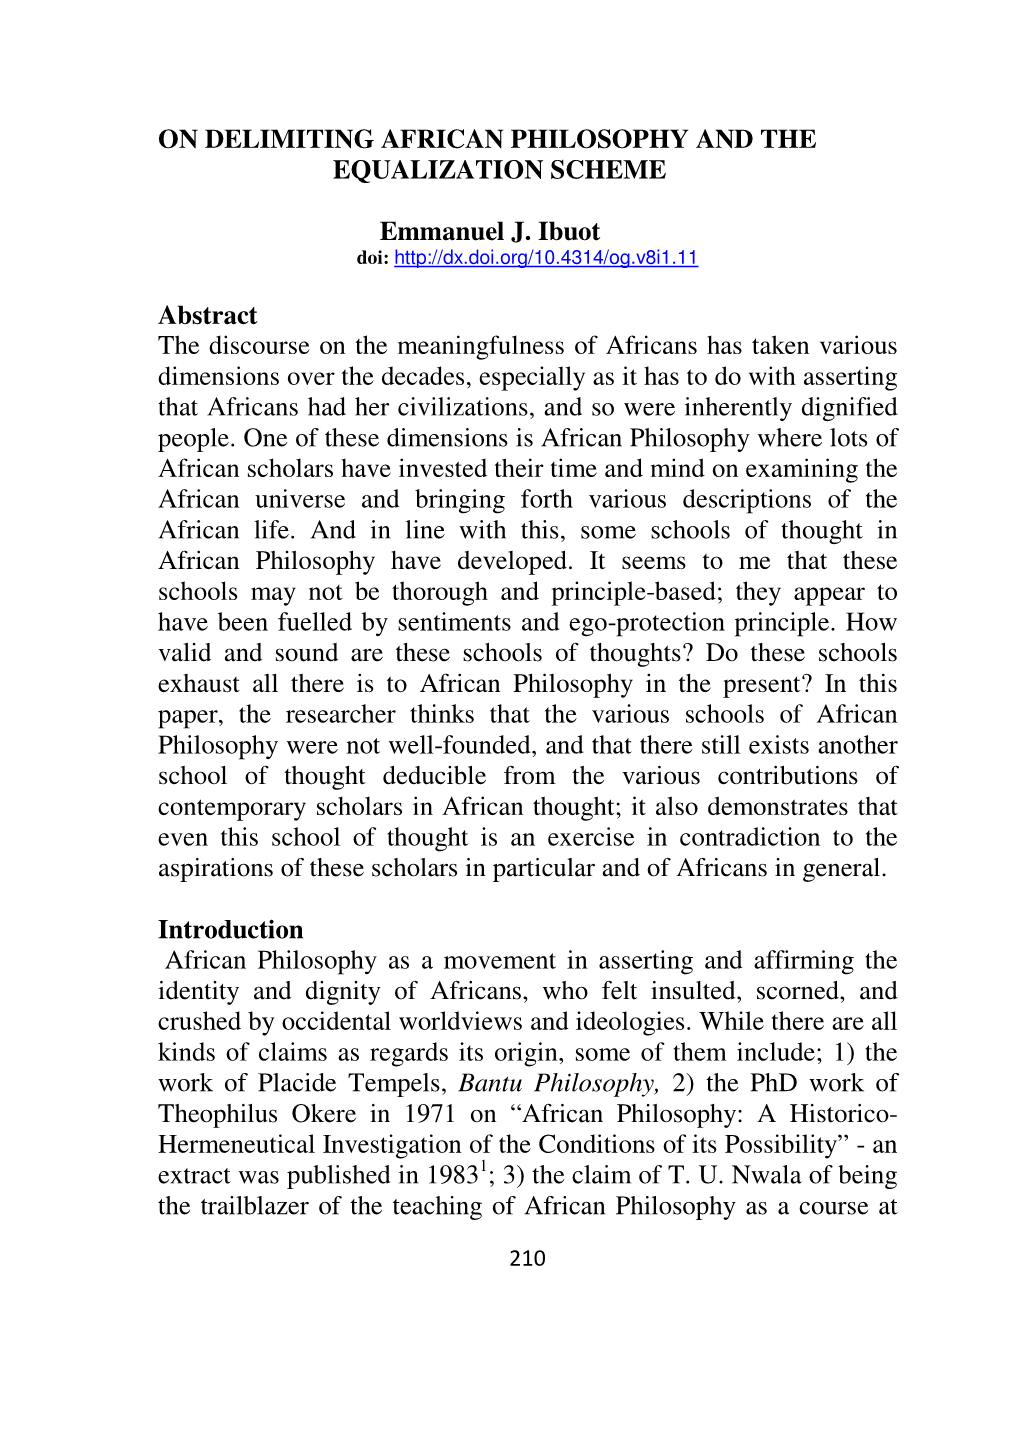 On Delimiting African Philosophy and the Equalization Scheme